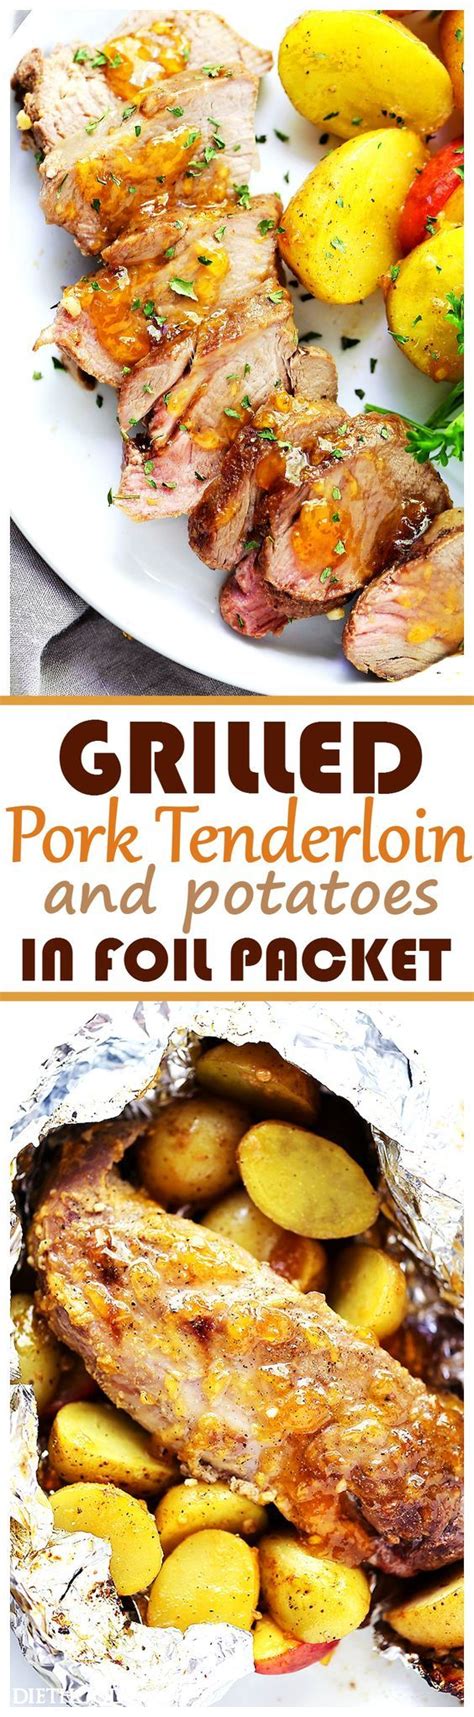 Place the pork loin on a sheet of tin foil and gently wrap the tin foil around the whole pork loin roast. Pork foil packet recipes | Healthy grilling recipes, Foil packet meals, Recipes